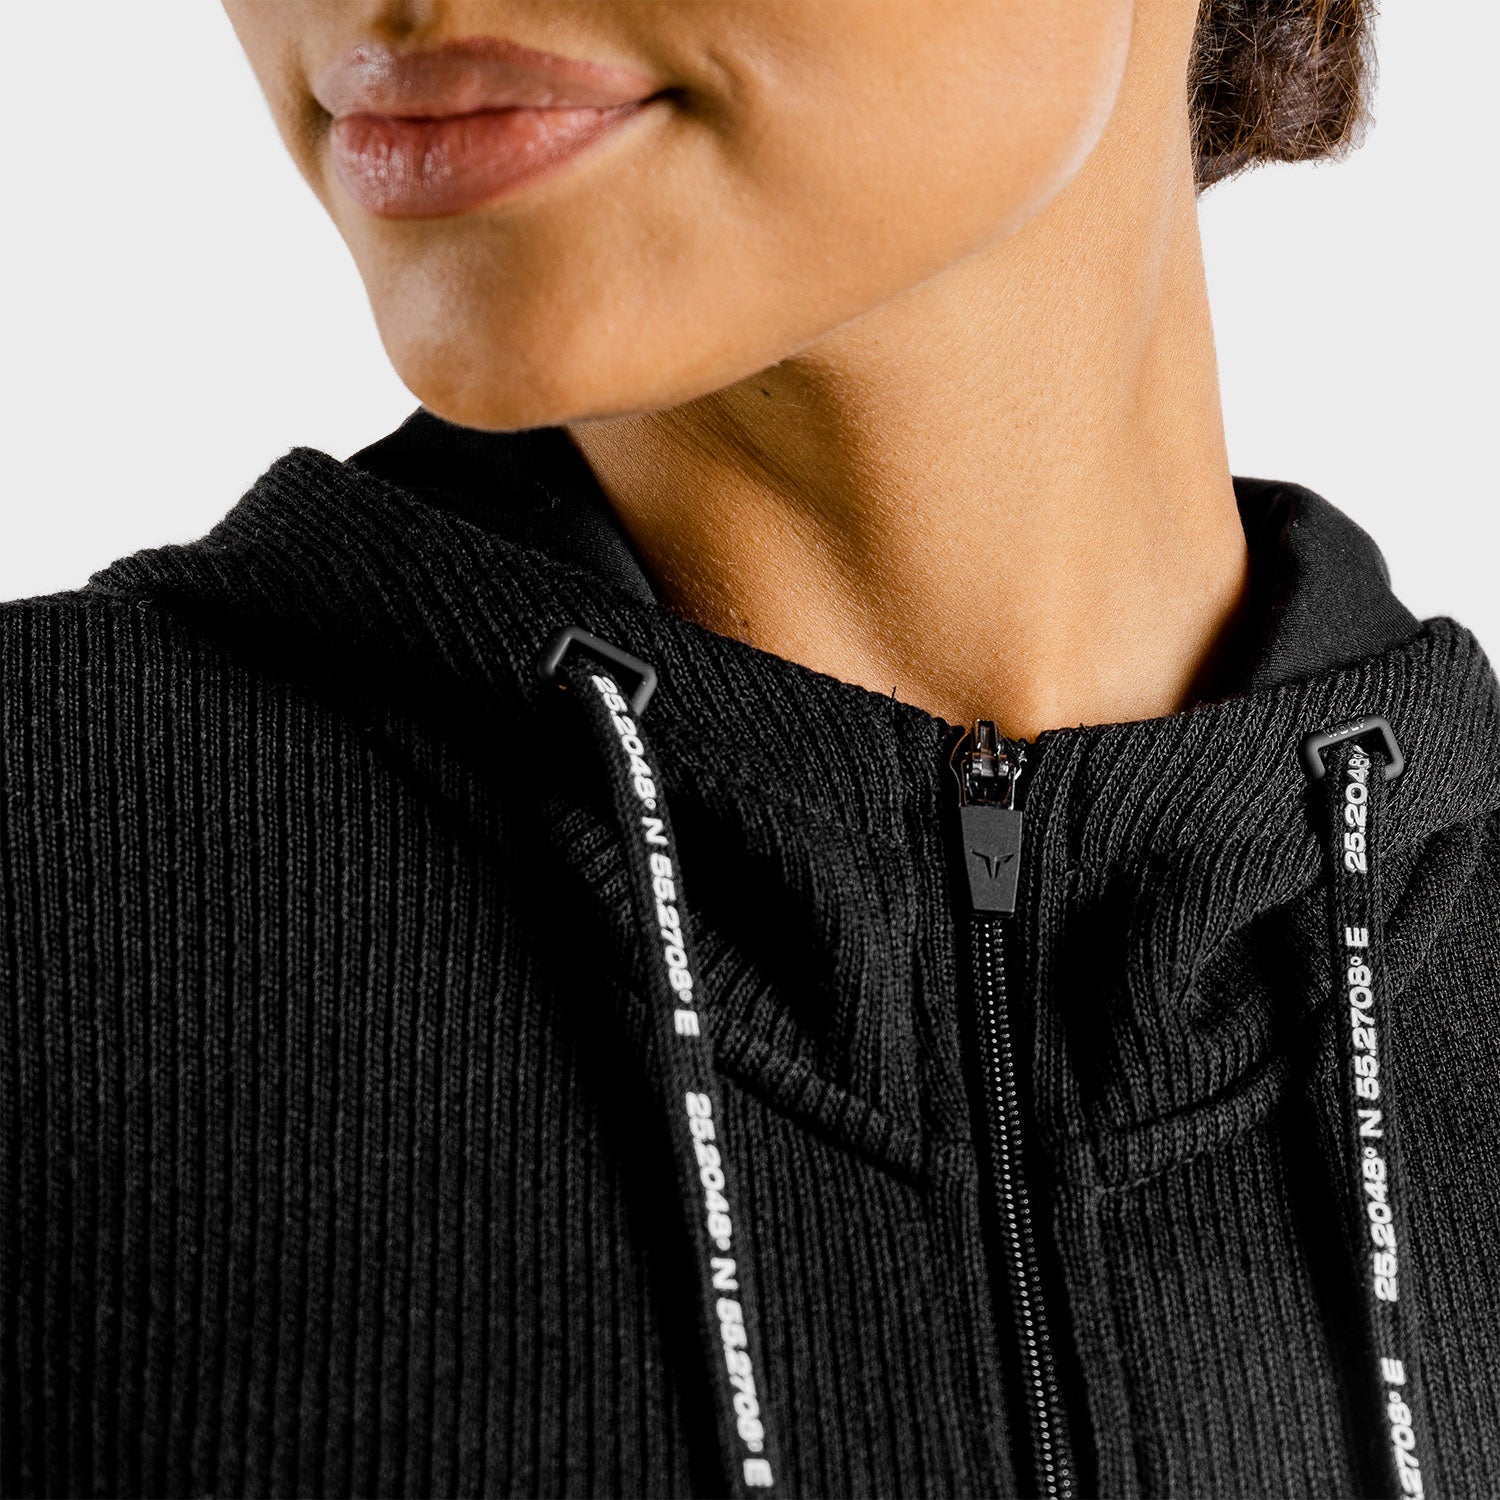 squatwolf-gym-hoodies-women-luxe-zip-up-black-workout-clothes